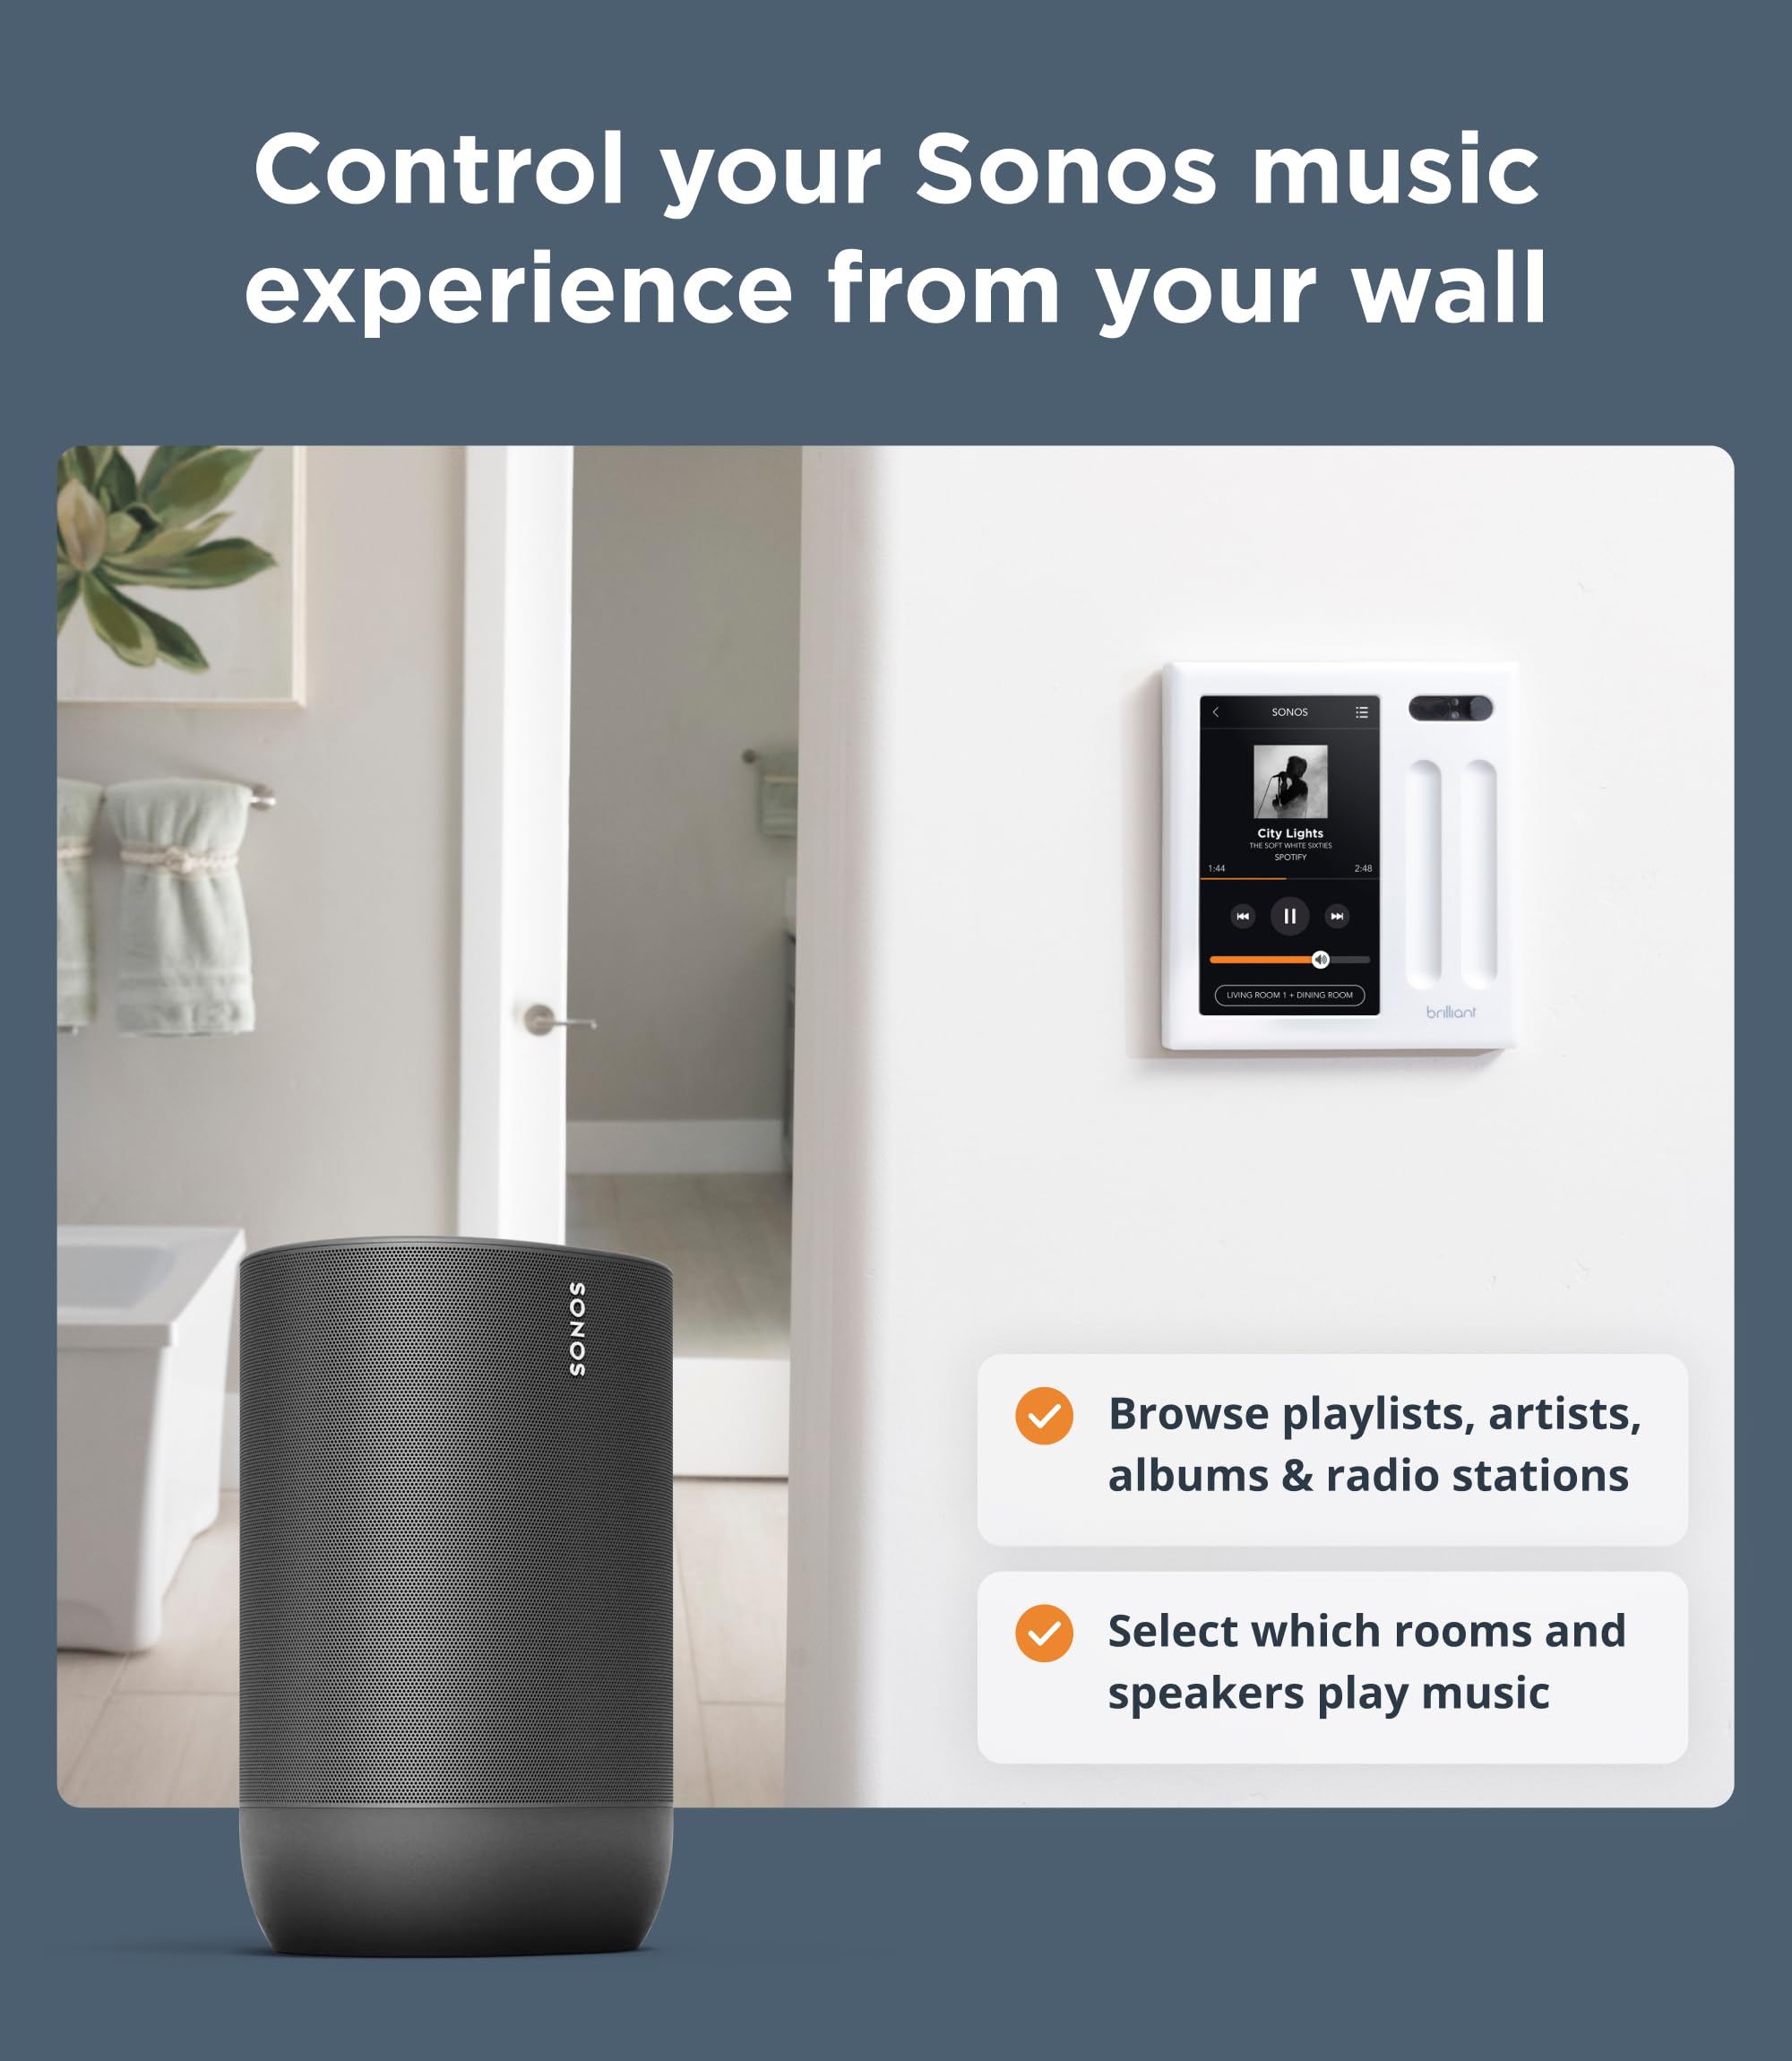 Brilliant Smart Home Control (2-Switch Panel) — Alexa Built-In & Compatible with Ring, Sonos, Hue, Google Nest, Wemo, SmartThings, Apple HomeKit — In-Wall Touchscreen Control for Lights, Music, & More